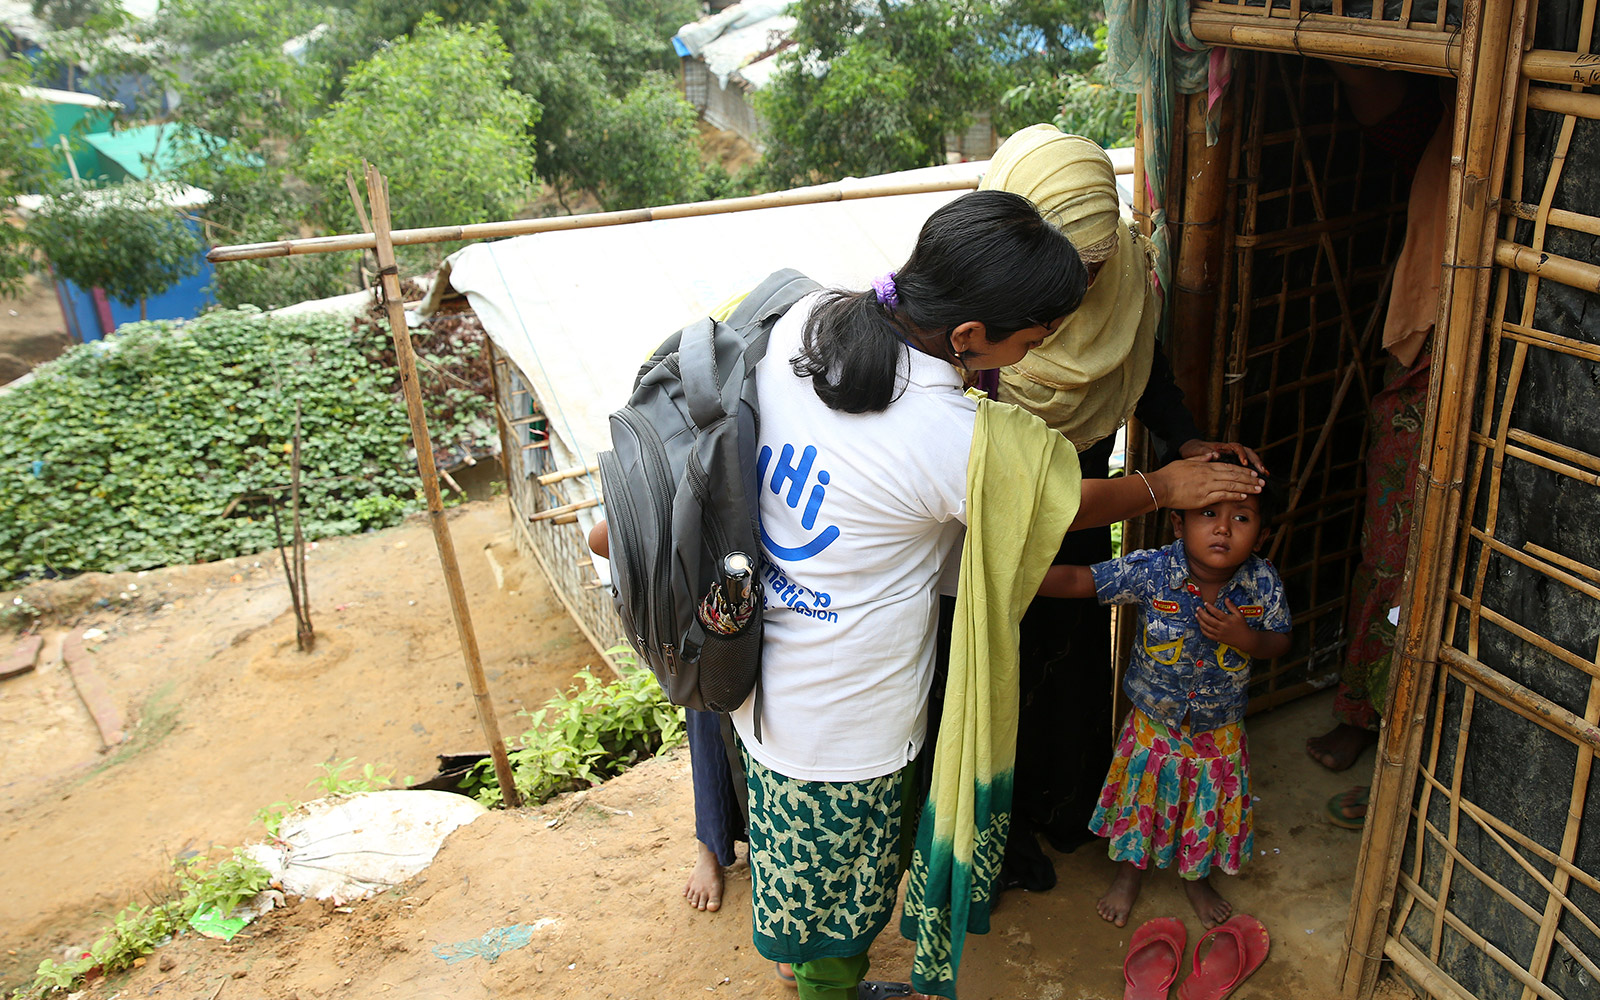 HI is conducting an emergency intervention in Rohingya refugee camps. Mobile teams identify injured people and purpose rehabilitation cares.